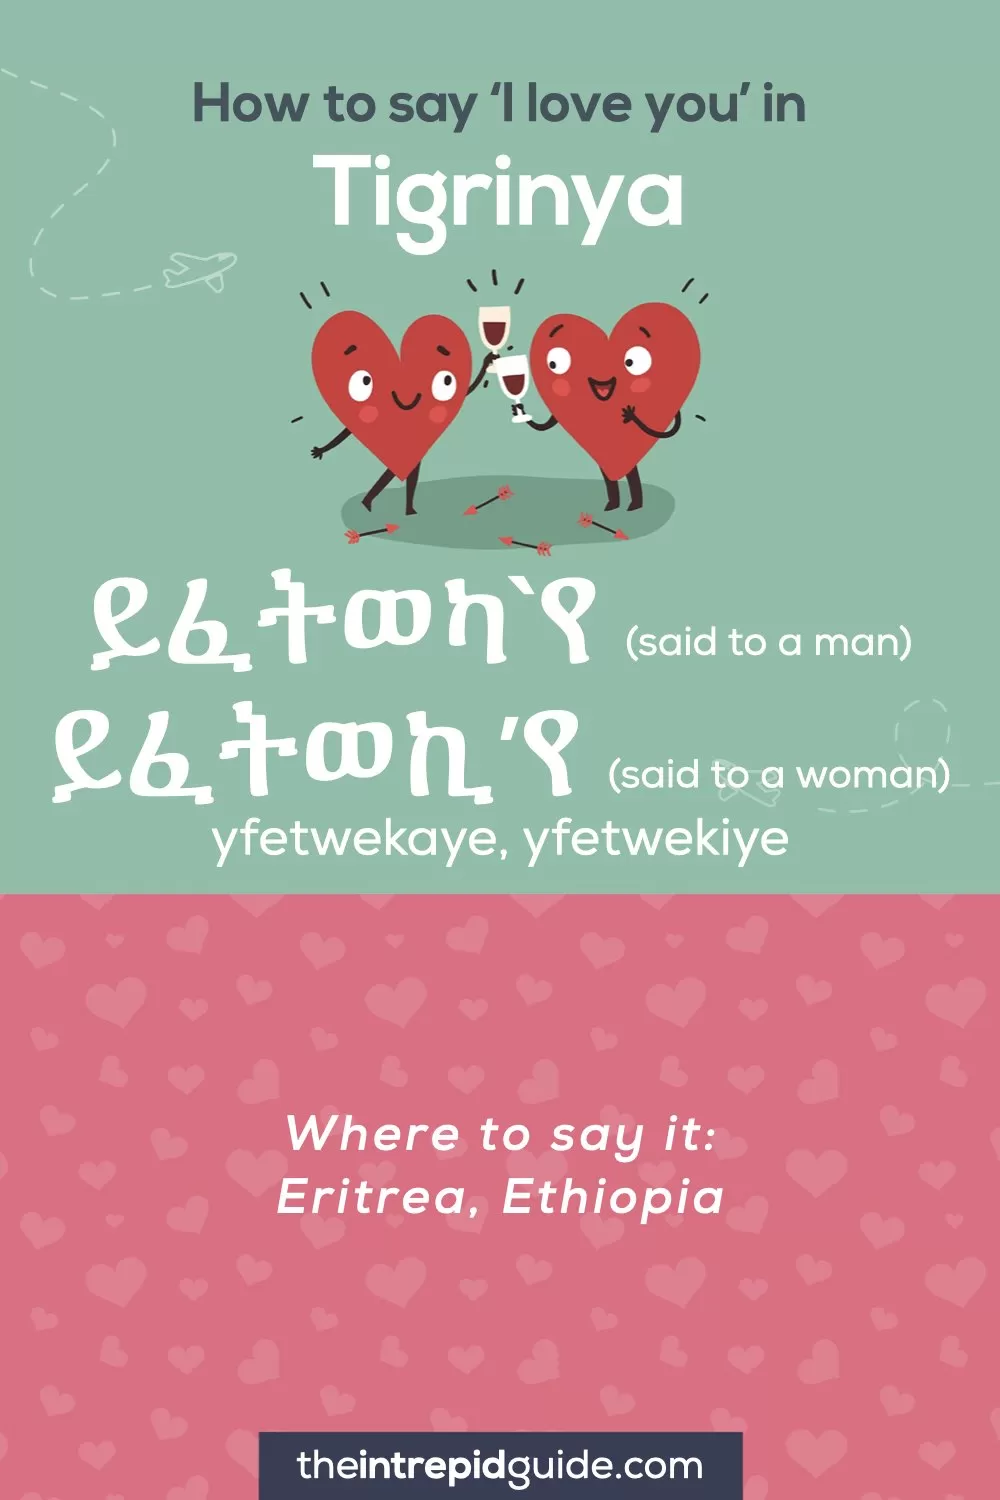 How to say I love you in different languages - Tigrinya - ይፈትወካ`የ (said to a man), ይፈትወኪ’የ (said to a woman)